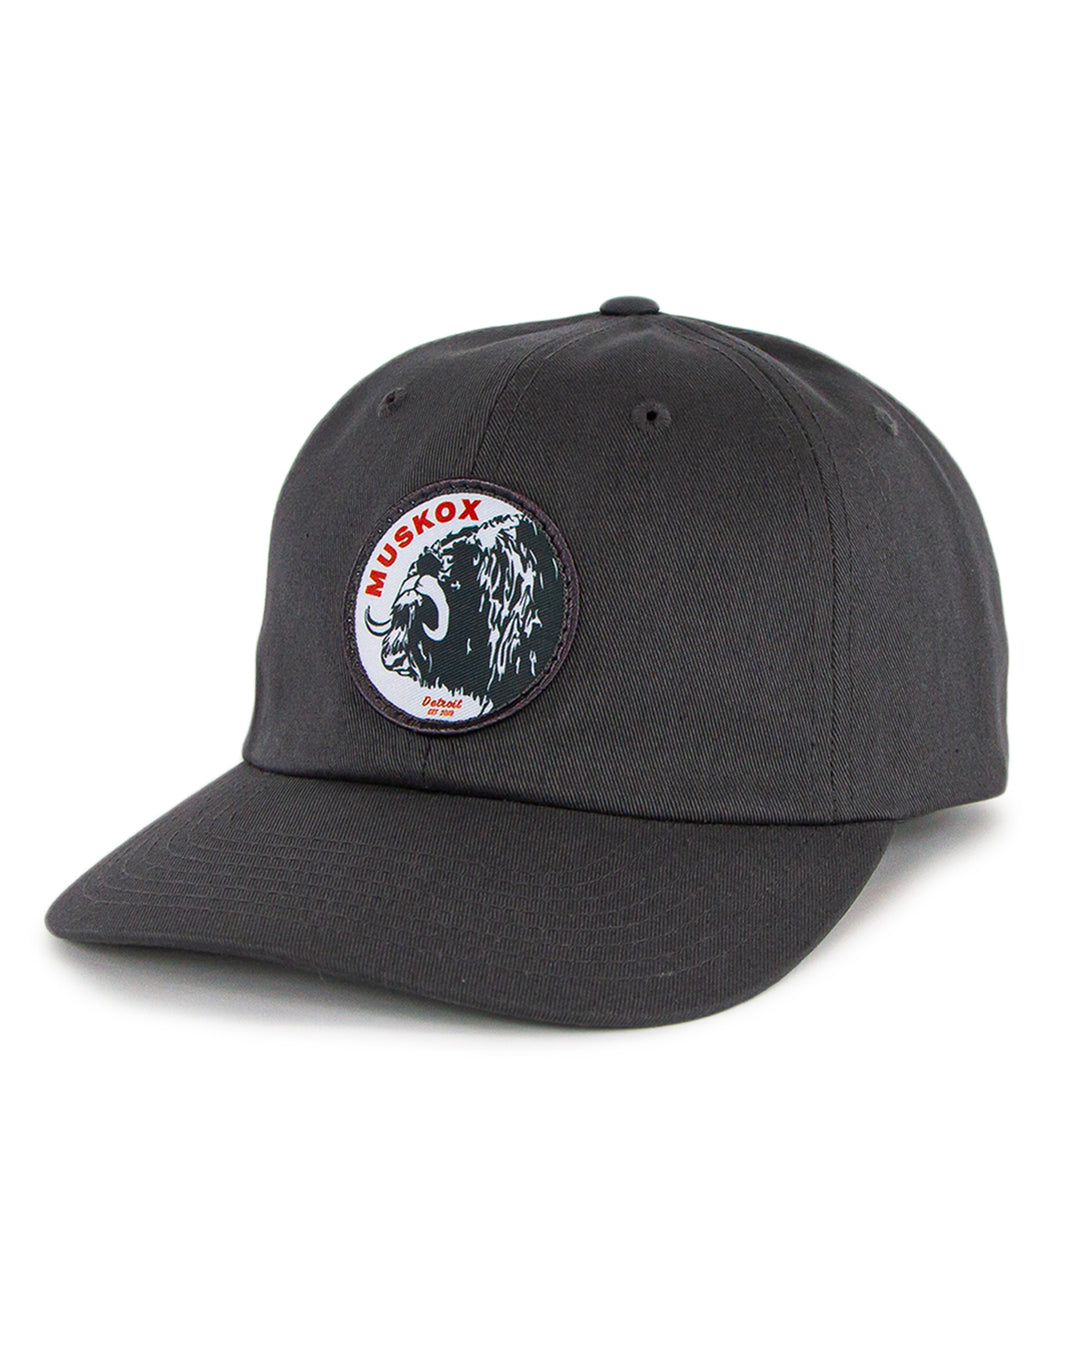 MuskOx Logo Patch Hat in Dark Grey, Cotton Twill Chino Hat with Strap, Embroidered in USA